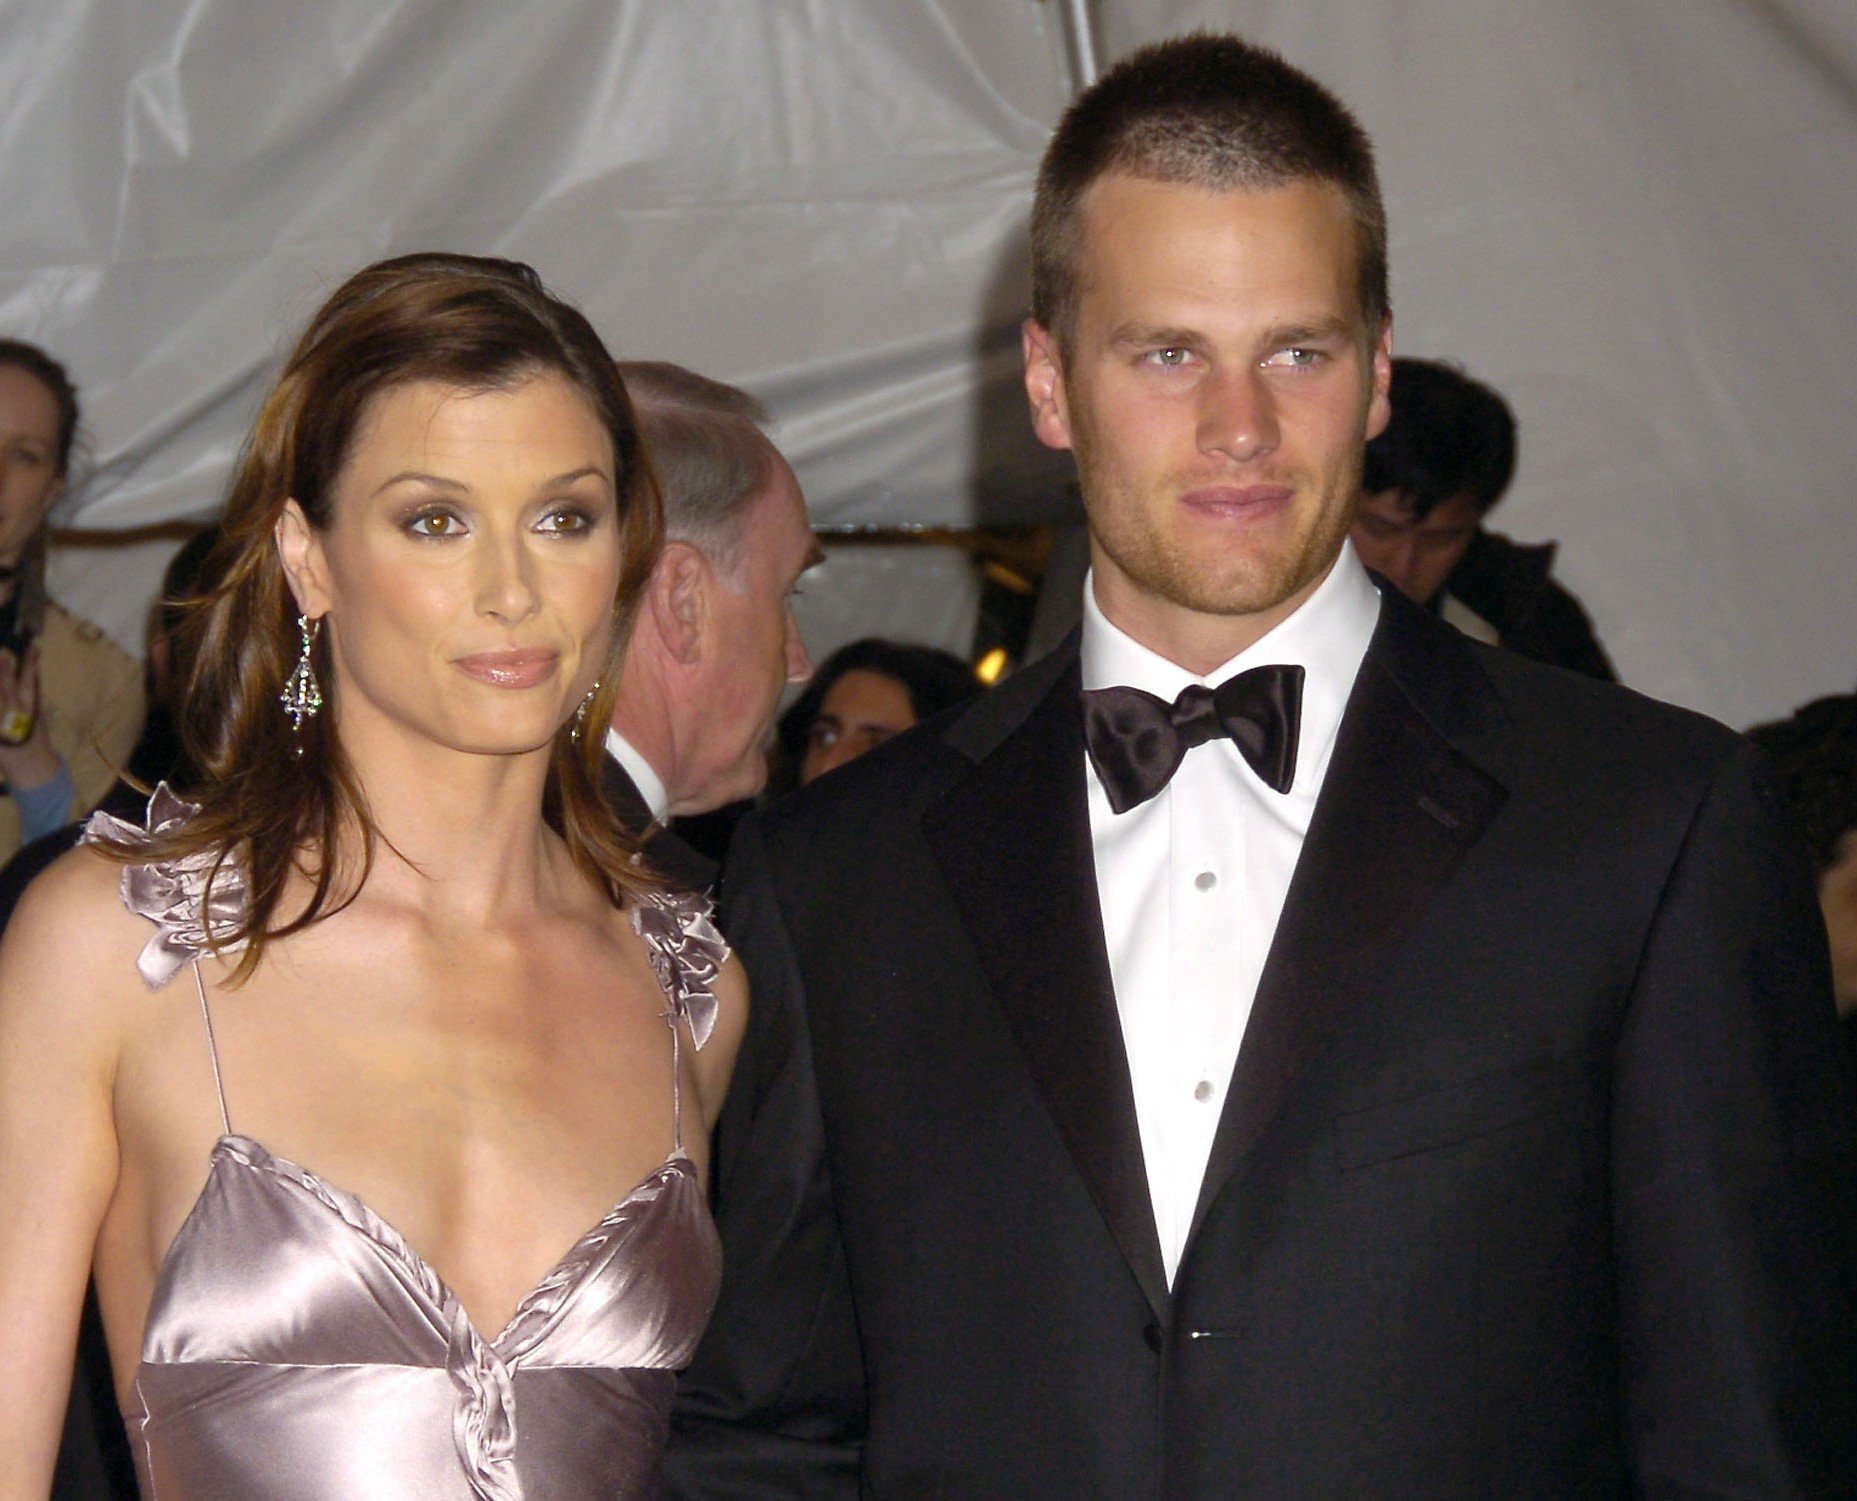 Bridget Moynahan & Tom Brady at the 12th Annual ESPY Awards - Arrivals at  the Kodak Theatre in Hollywood, CA. The event took place on Wednesday, July  14, 2004. Photo by: SBM /